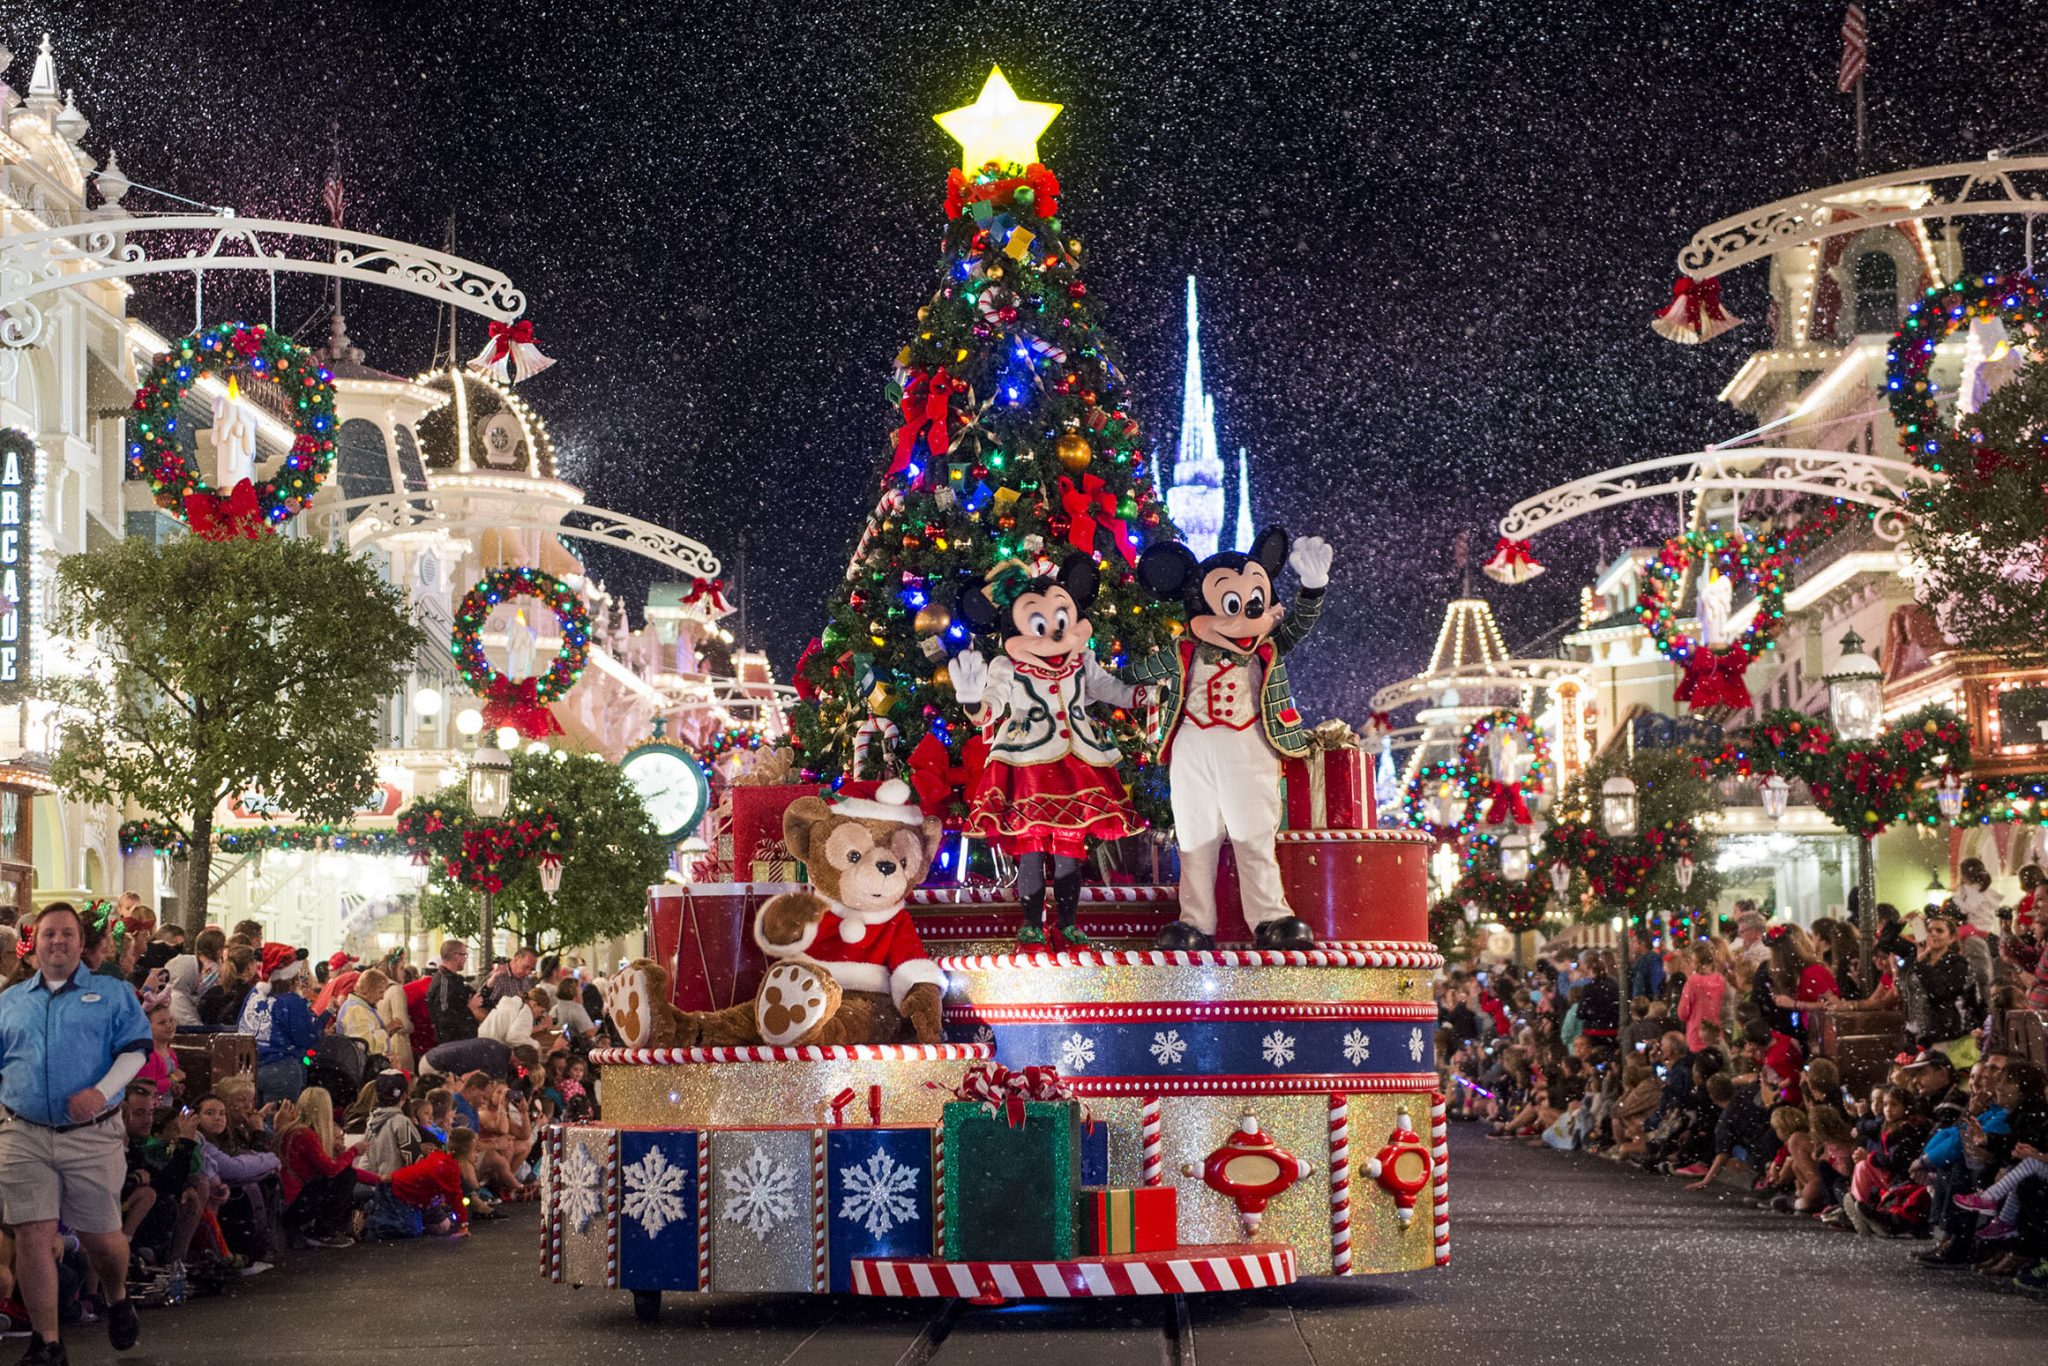 Mickey Mouse, Minnie Mouse and Duffy wave to Magic Kingdom guests as snow falls on Main Street, U.S.A., during " Mickey's Once Upon a Christmastime Parade" at Walt Disney World Resort. The festive processional is one of the happy highlights of Mickey's Very Merry Christmas Party, a night of holiday splendor with lively stage shows, a unique holiday parade, Holiday Wishes: Celebrate the Spirit of the Season nighttime fireworks, and snow flurries on Main Street, U.S.A. The special-ticket event takes place on select nights in November and December at Magic Kingdom in Lake Buena Vista, Fla. (Ryan Wendler, photographer)